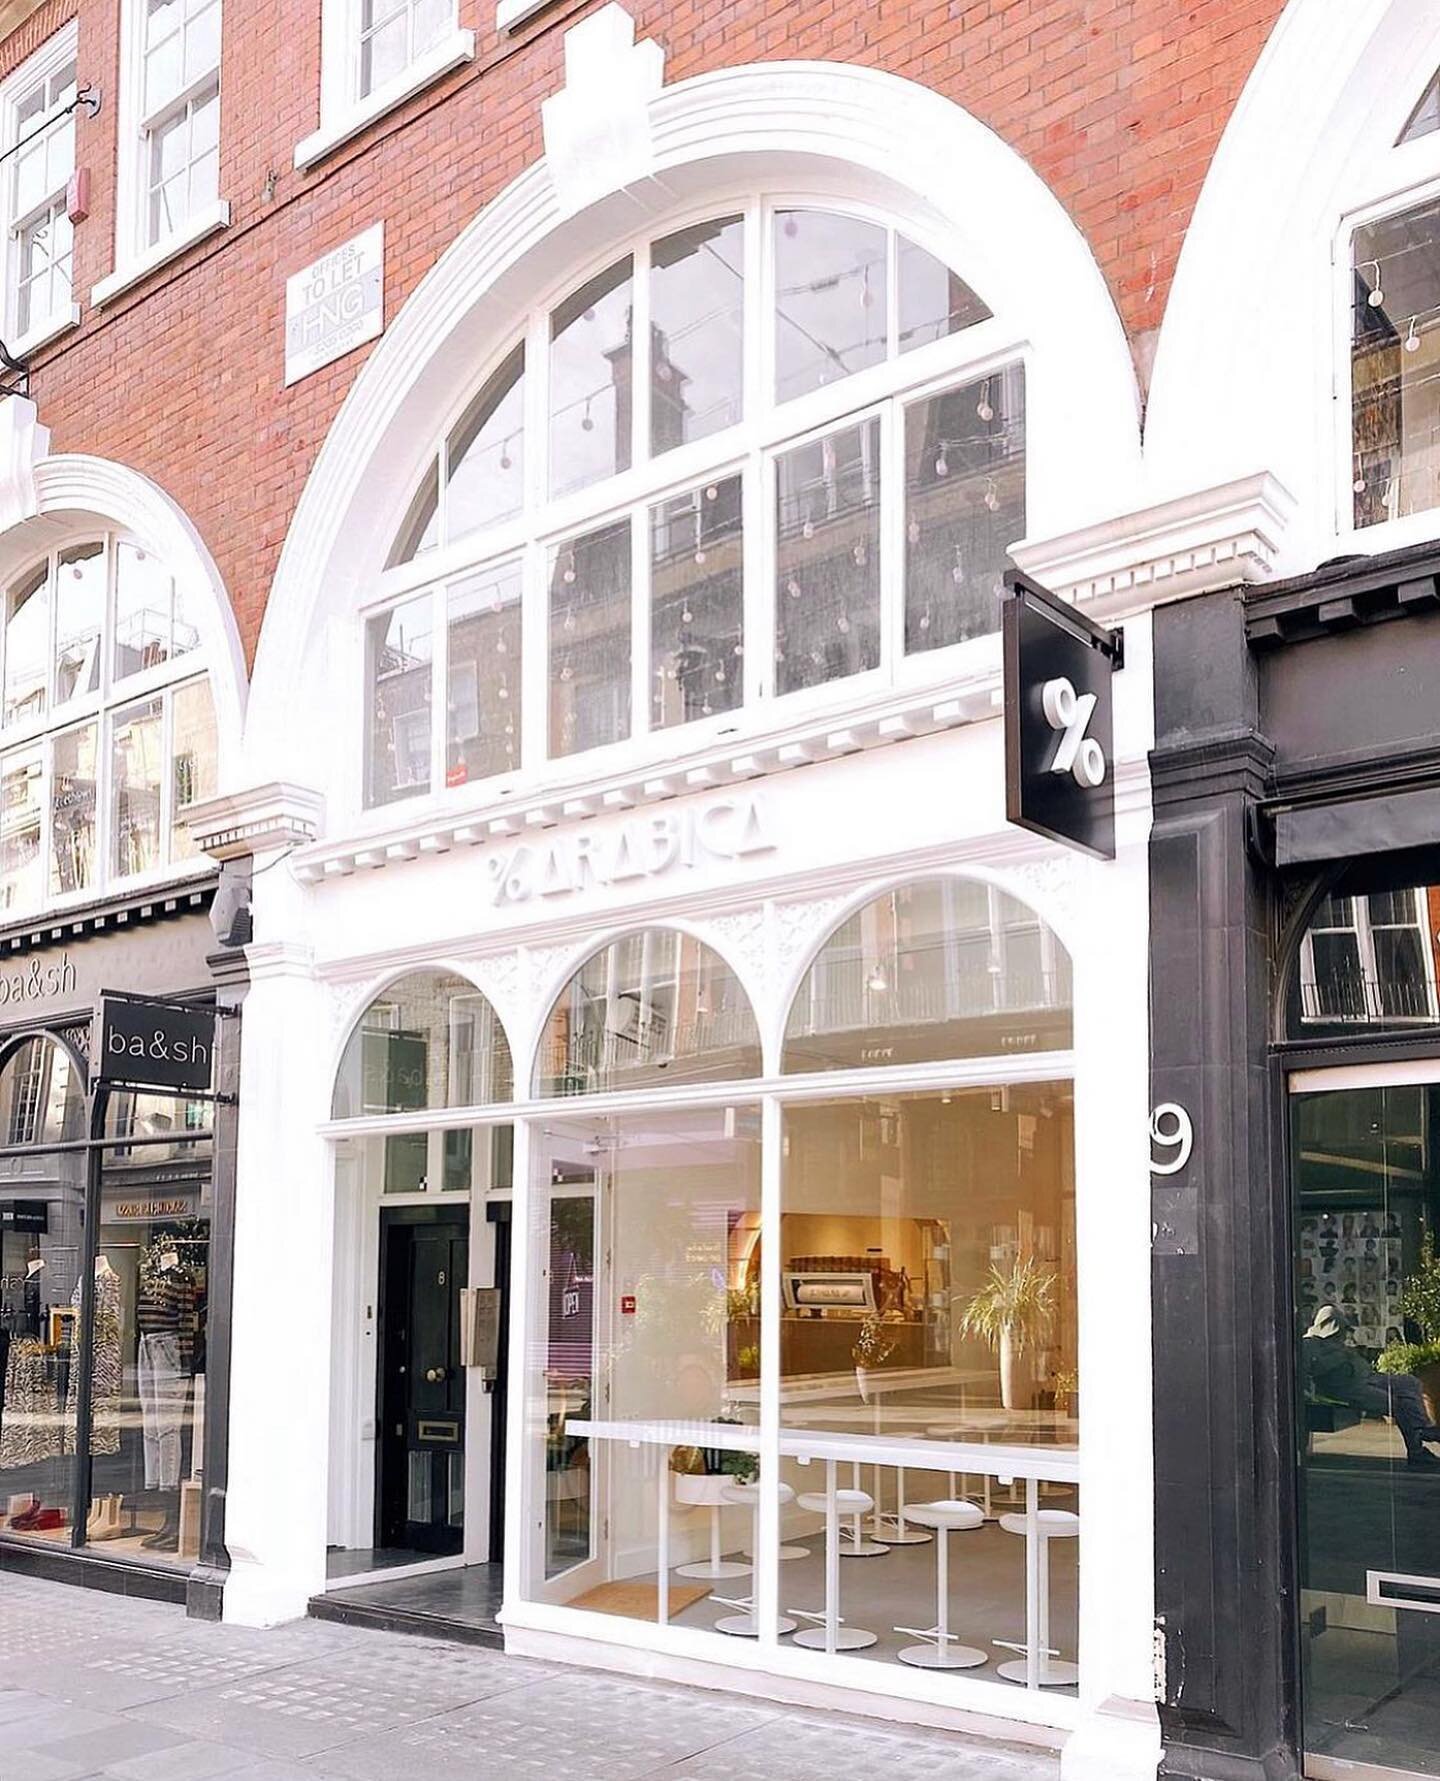 We are very excited to see @arabica_uk open their third store on South Molton Street..! Get down there for all your coffee desires!! @southmolton_ldn 

We acted on behalf of City of London Corporation. 

#arabicauk #coffee #southmoltonstreet #cityofl